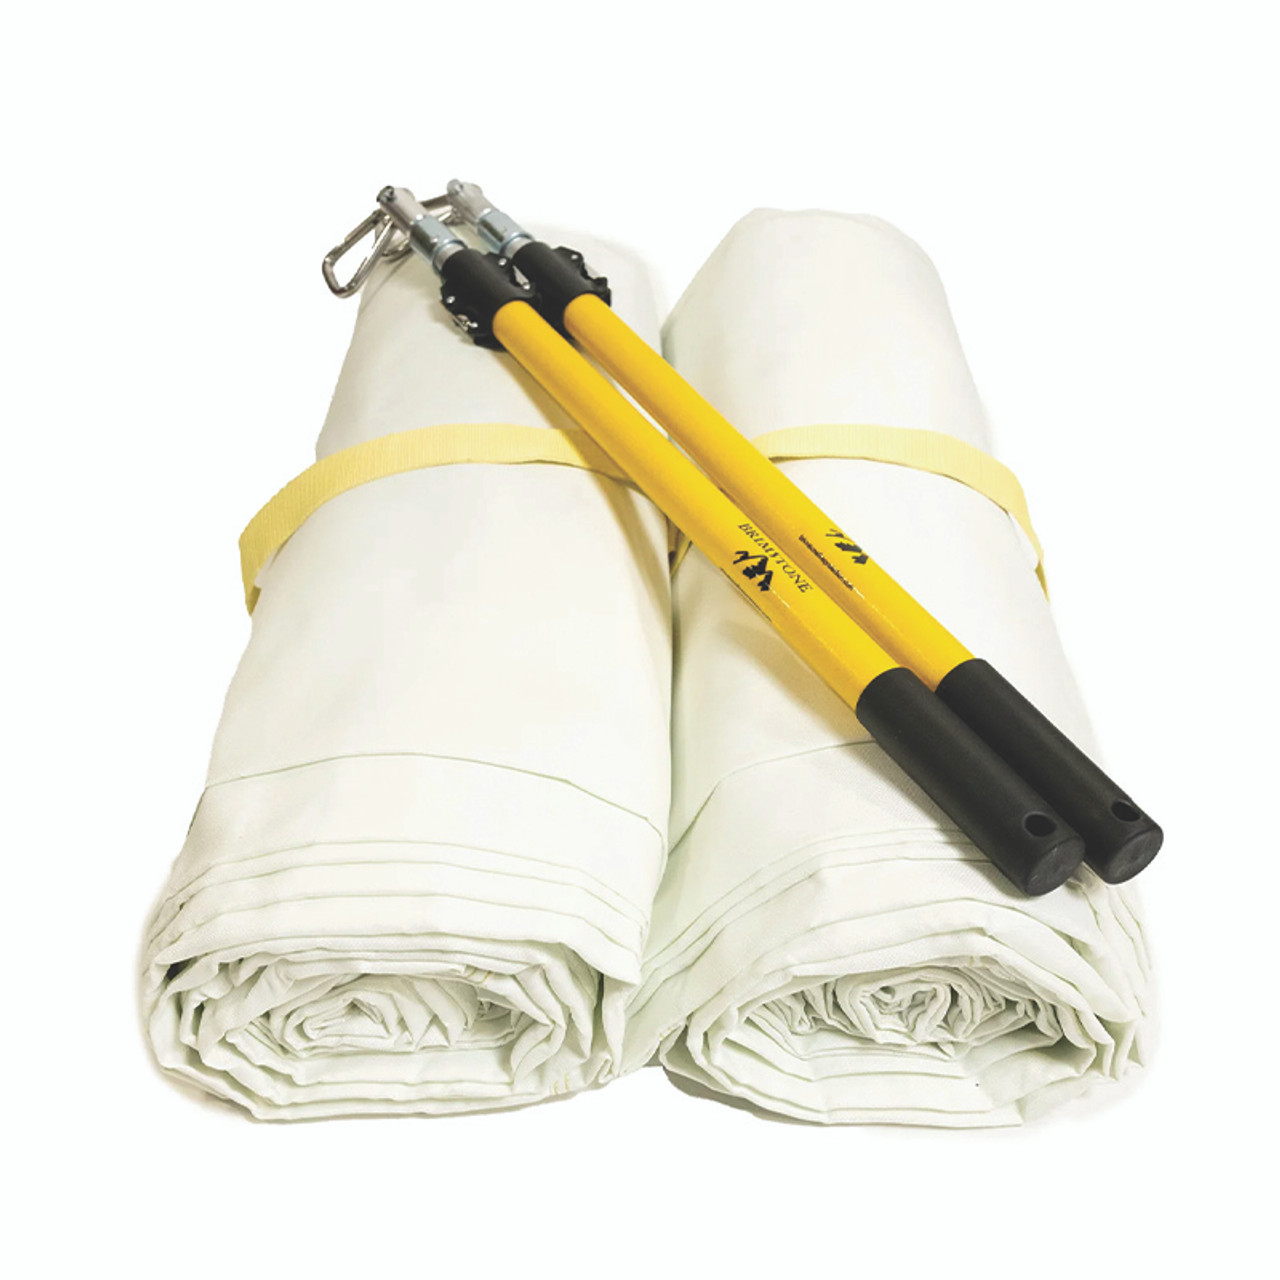 Brimstone Blanket Kit with 25' x 33' Firefighting Blanket, Pole Set, and Cinch Strap for Sale at Curtis - Tools for Heroes